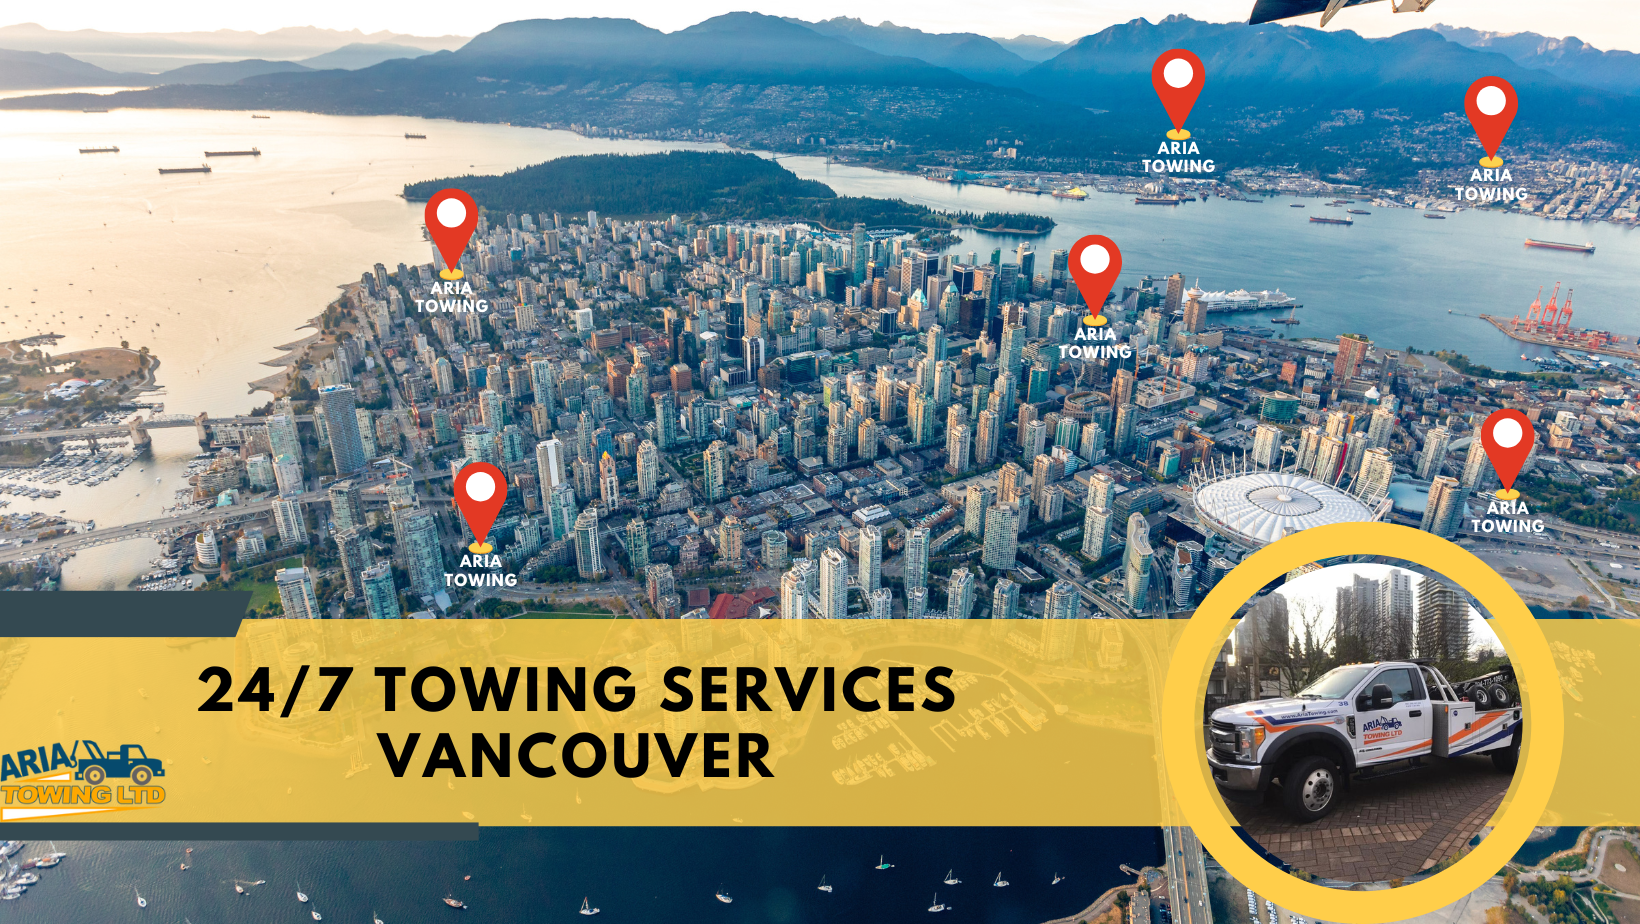 Towing Vancouver